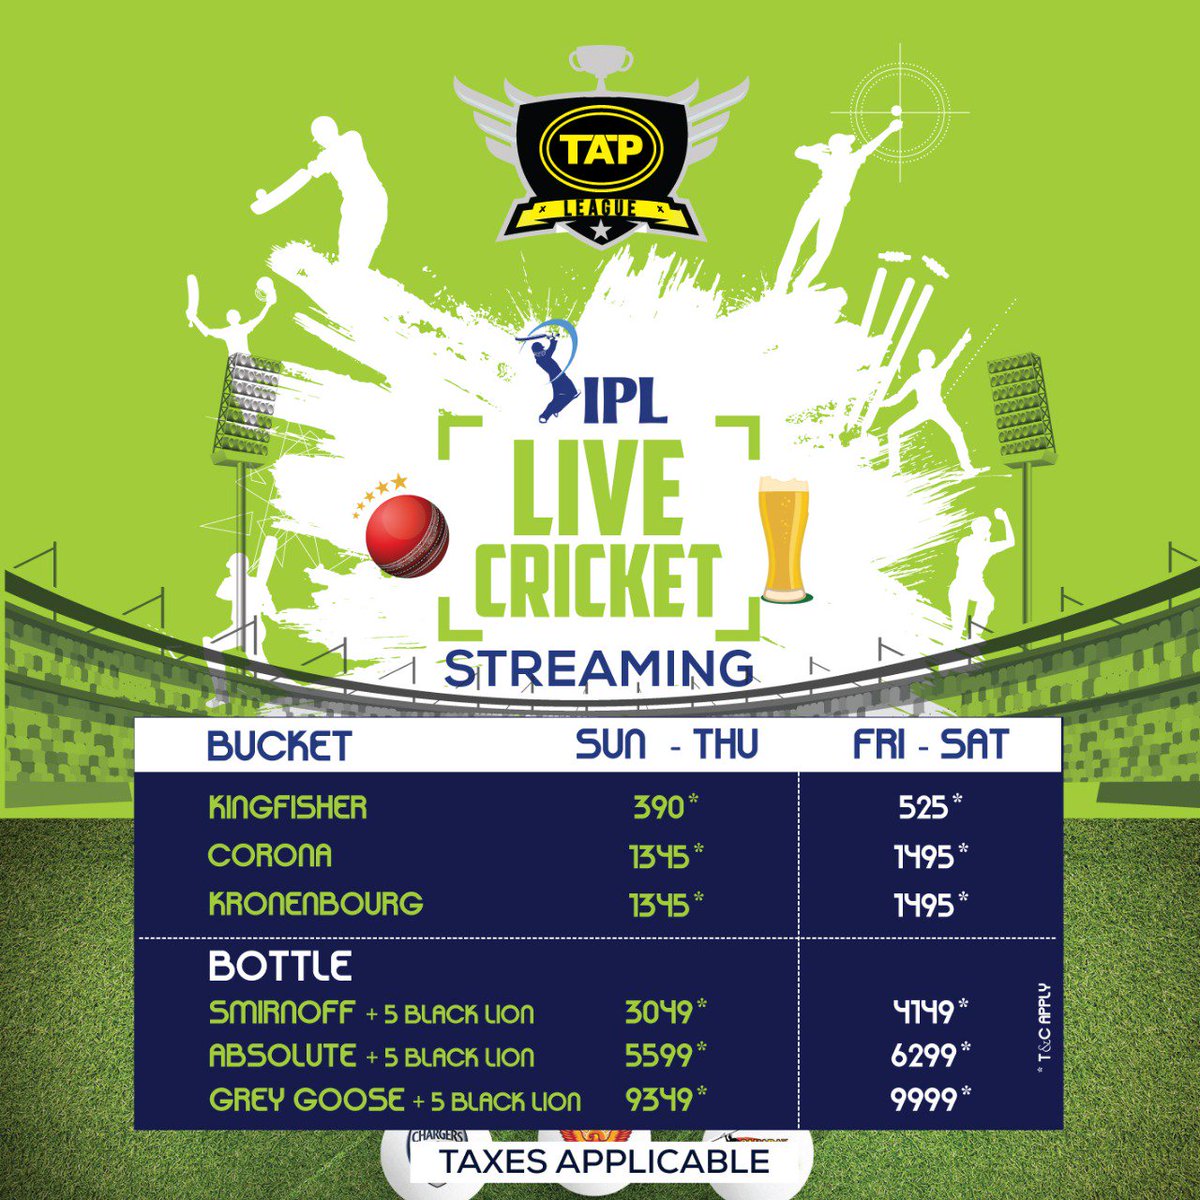 Don’t lie around like a couch potato for this #IPL seasons!!! #TAP invites you for the ultimate action to experience the sports on smashing projector viewing or massive multi-screen & sing, shout and pep talk with other supporters that will make you feel like you are at the #GAME